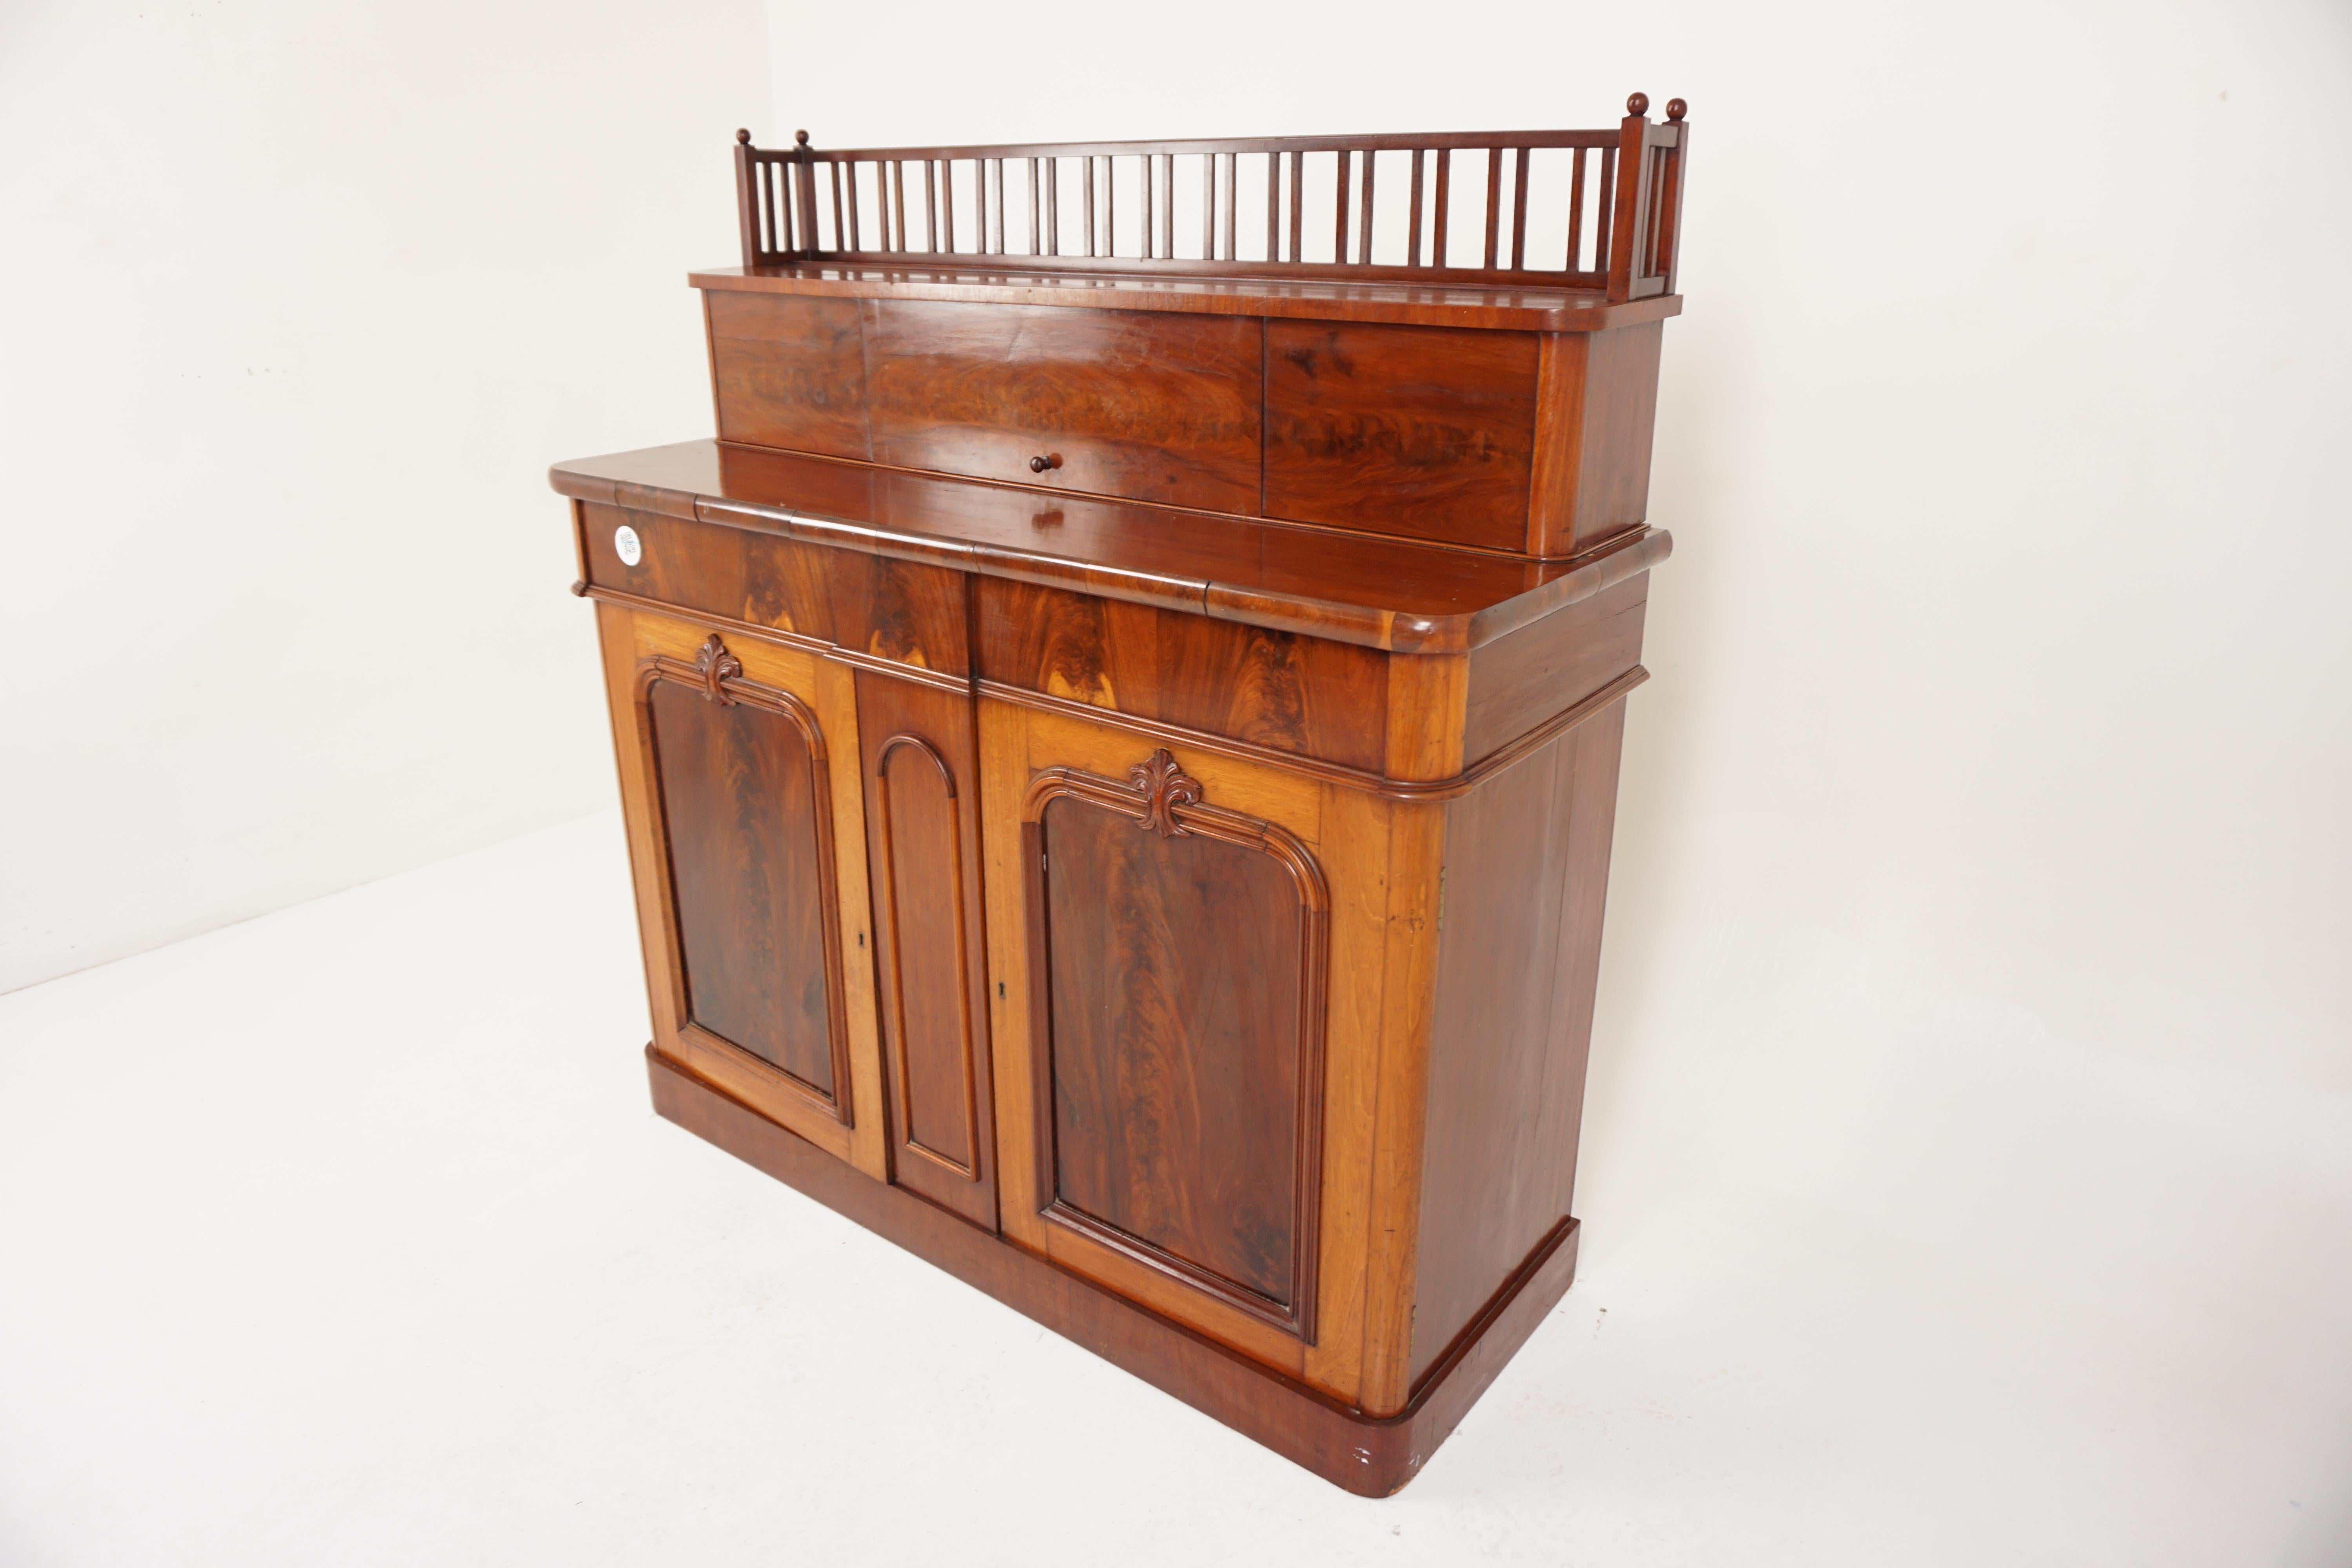 Antique Victorian walnut sideboard, chiffonier, buffet, Scotland 1870, H781

$2250
Scotland 1870
Solid walnut and veneers
Original finish.

3 Quarter open gallery on top
Central slide out drawer underneath with storage space
Has rectangular